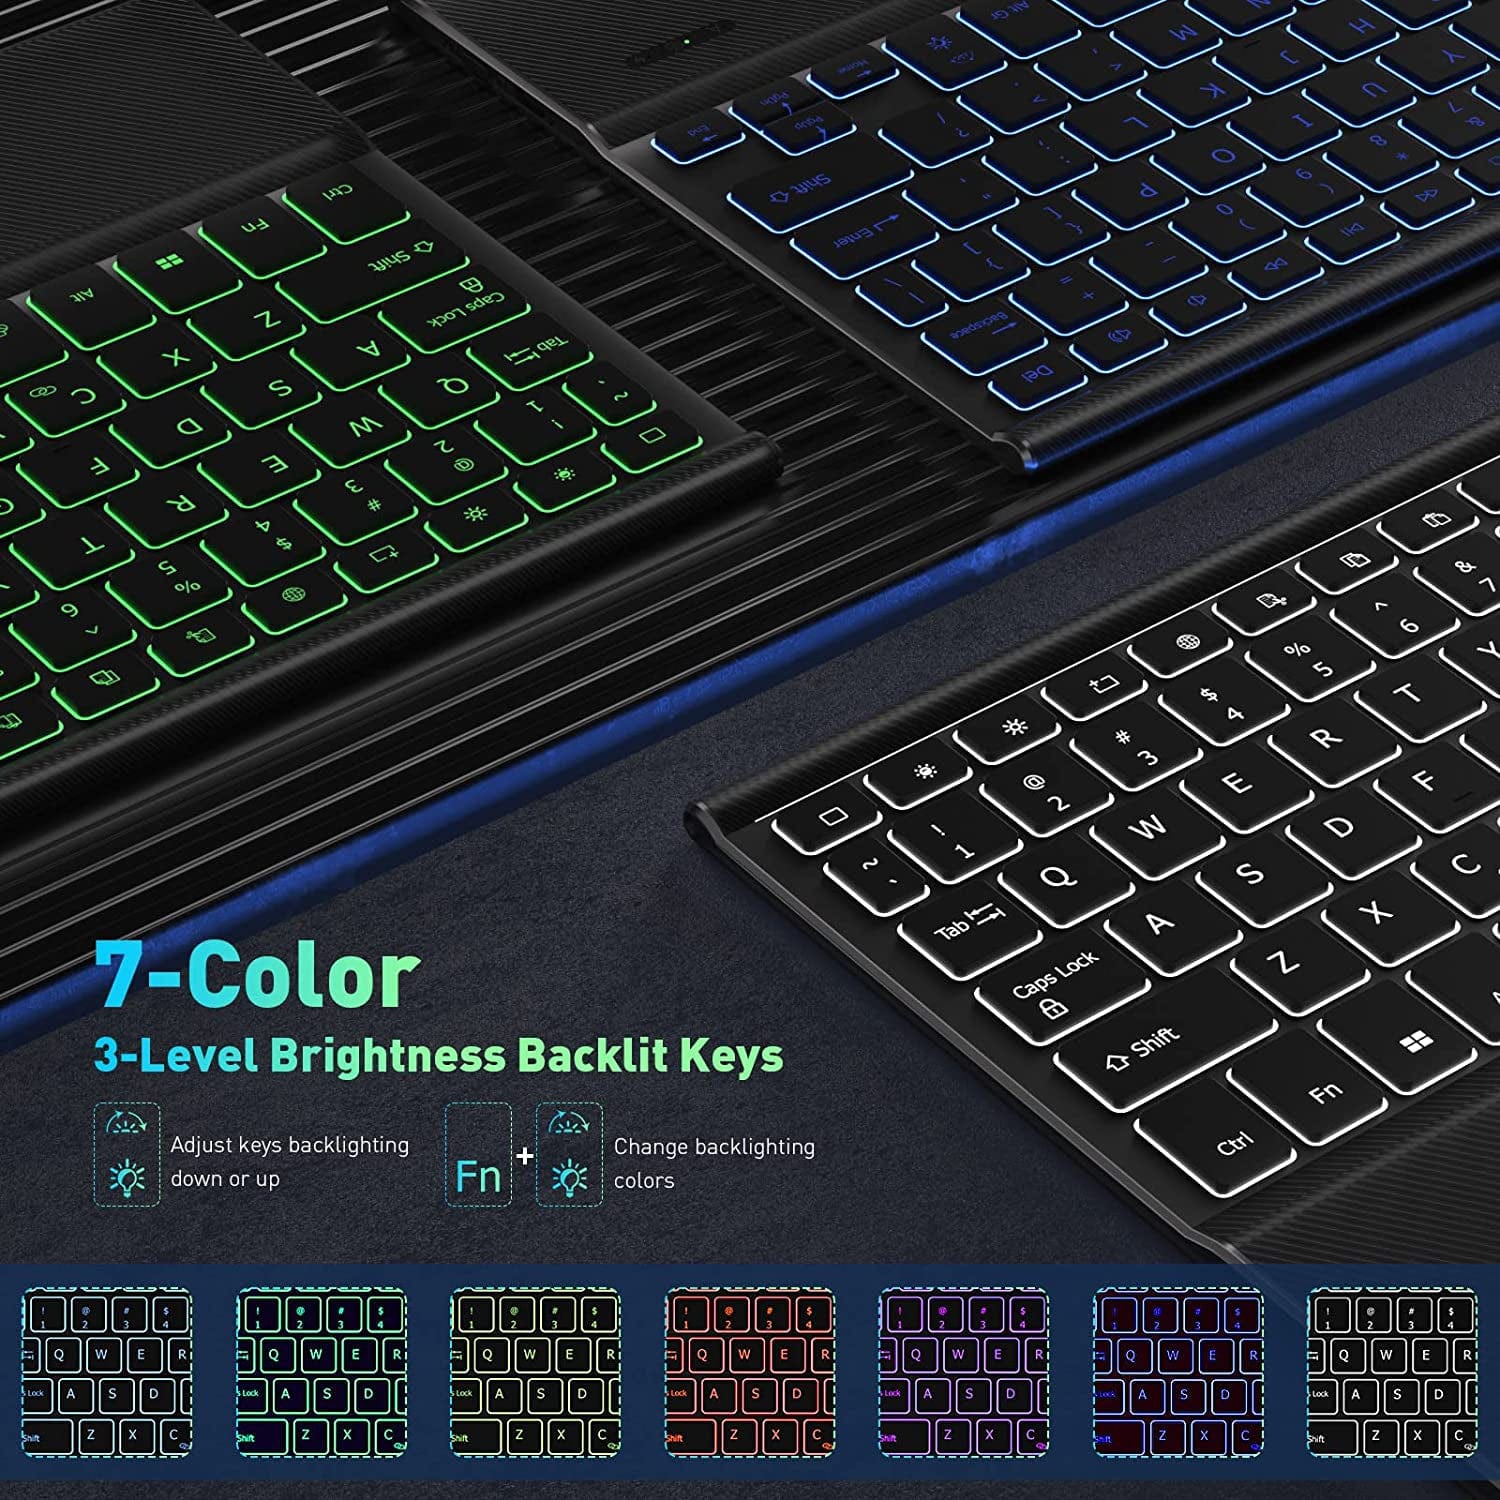 Navigate Keyboard Case with Mouse Pad for Lenovo Tab P11 (2nd Generation)